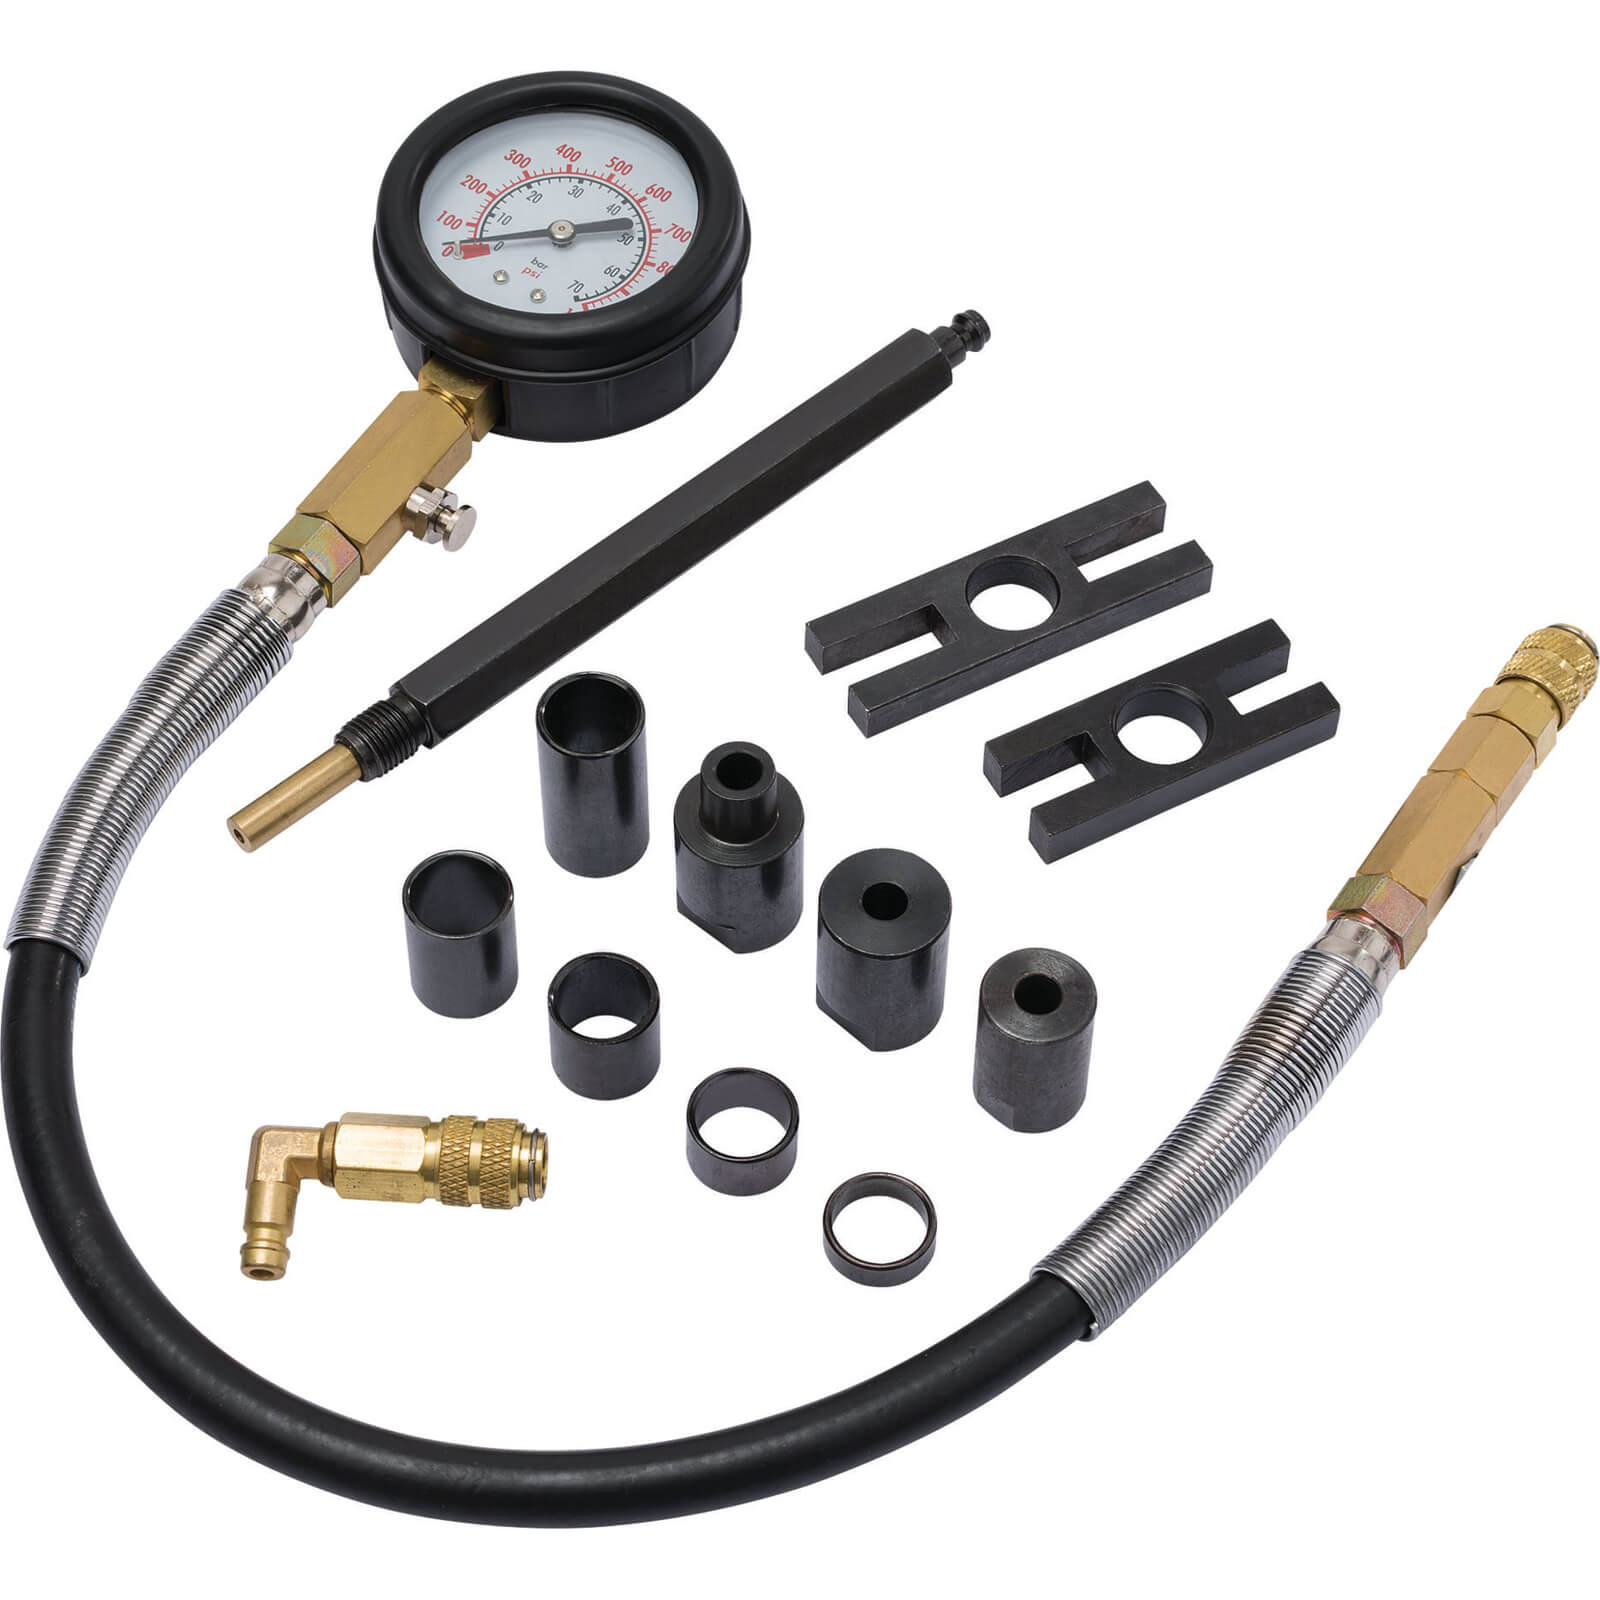 Image of Draper 13 Piece Diesel Compression Test Kit for Commercial Vehicles